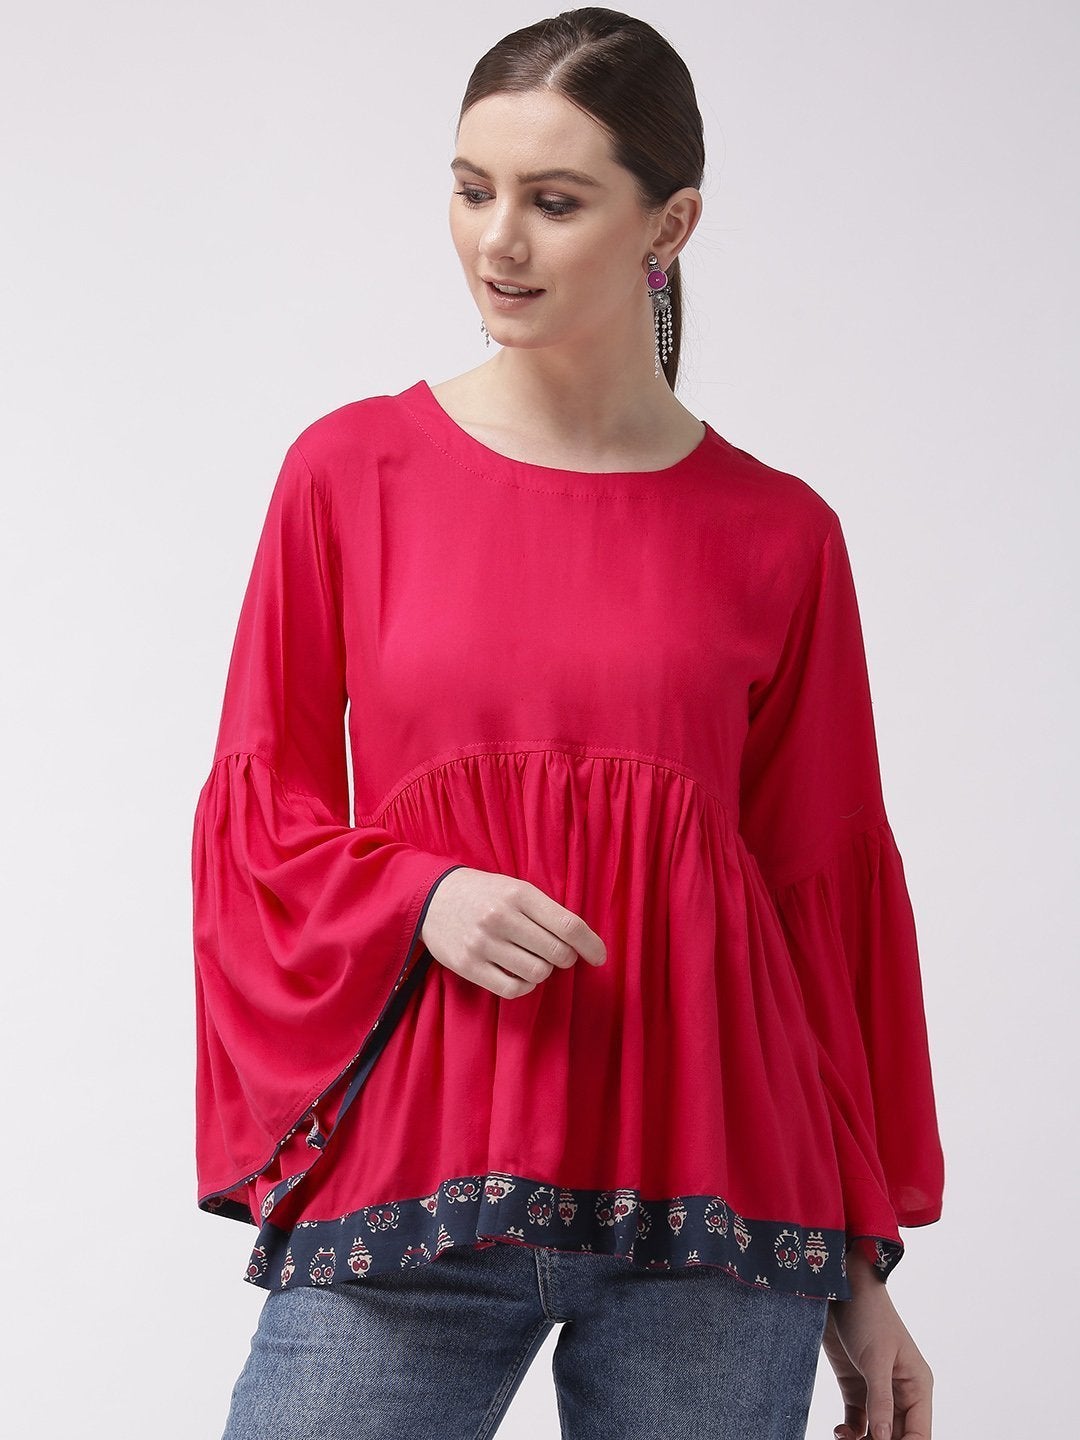 Women's Pink Bell Sleeves Top With Border - InWeave